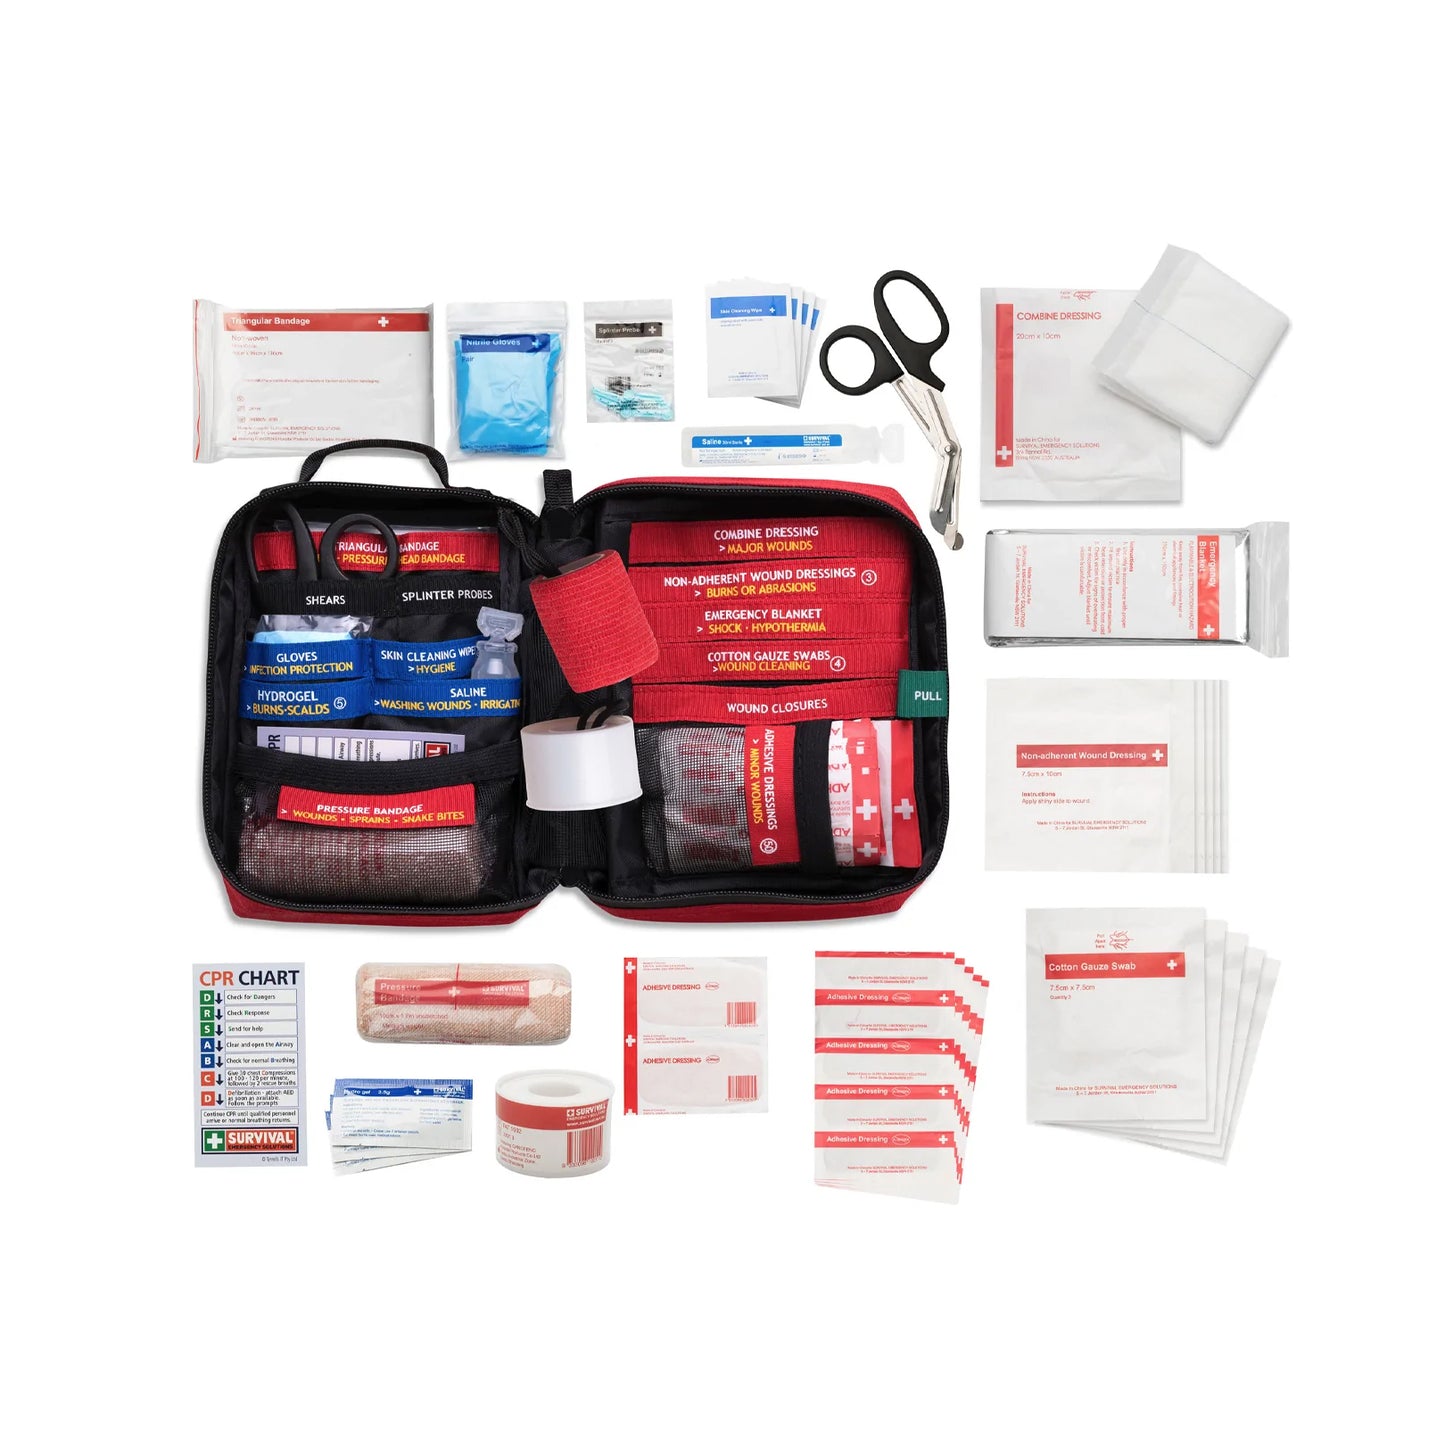 CREATURES SURVIVAL FIRST AID KIT